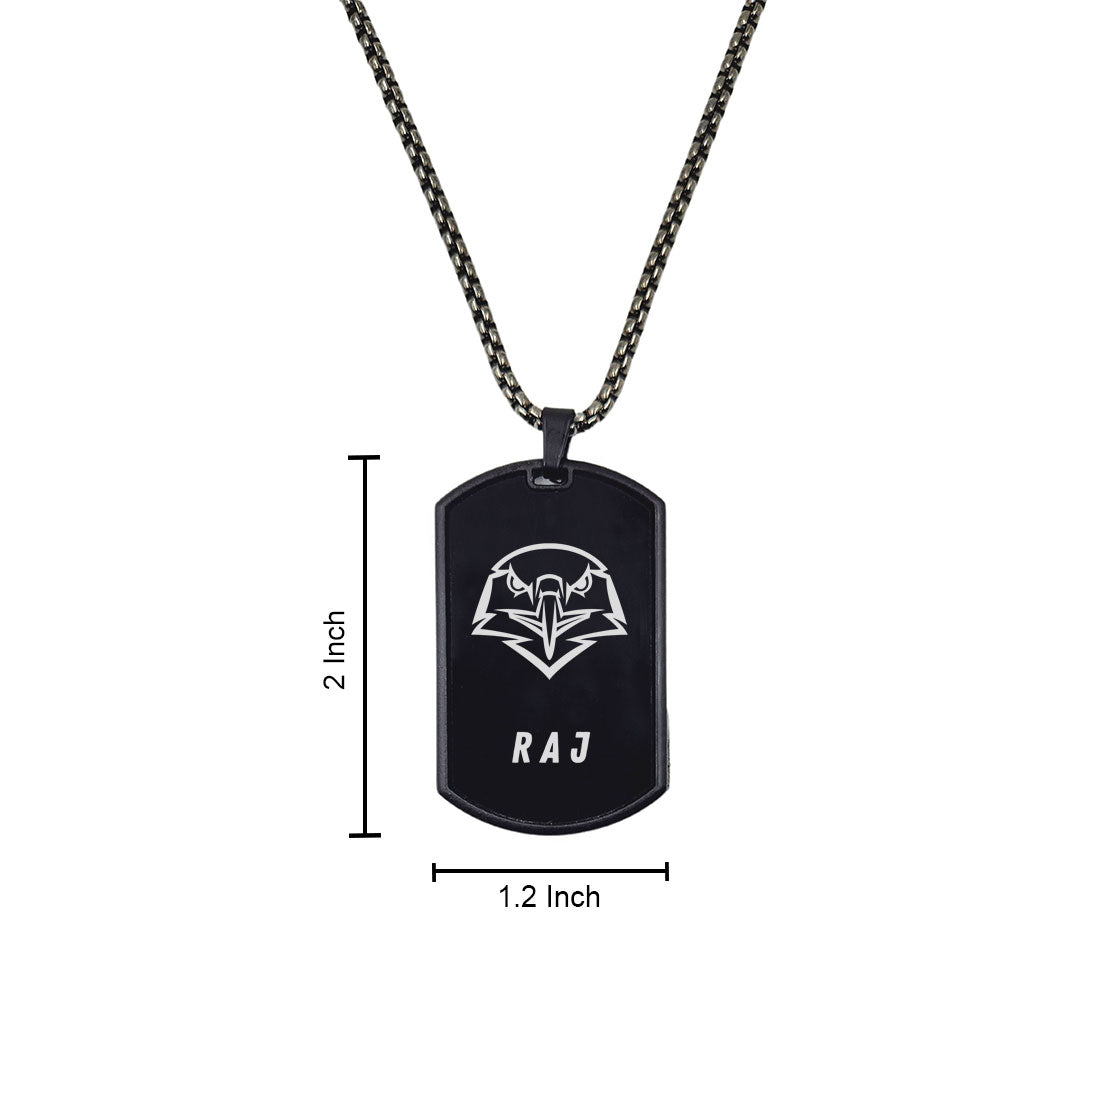 Personalized Dog Tag Chain for Men Women Military Army Dog Tags Engraved